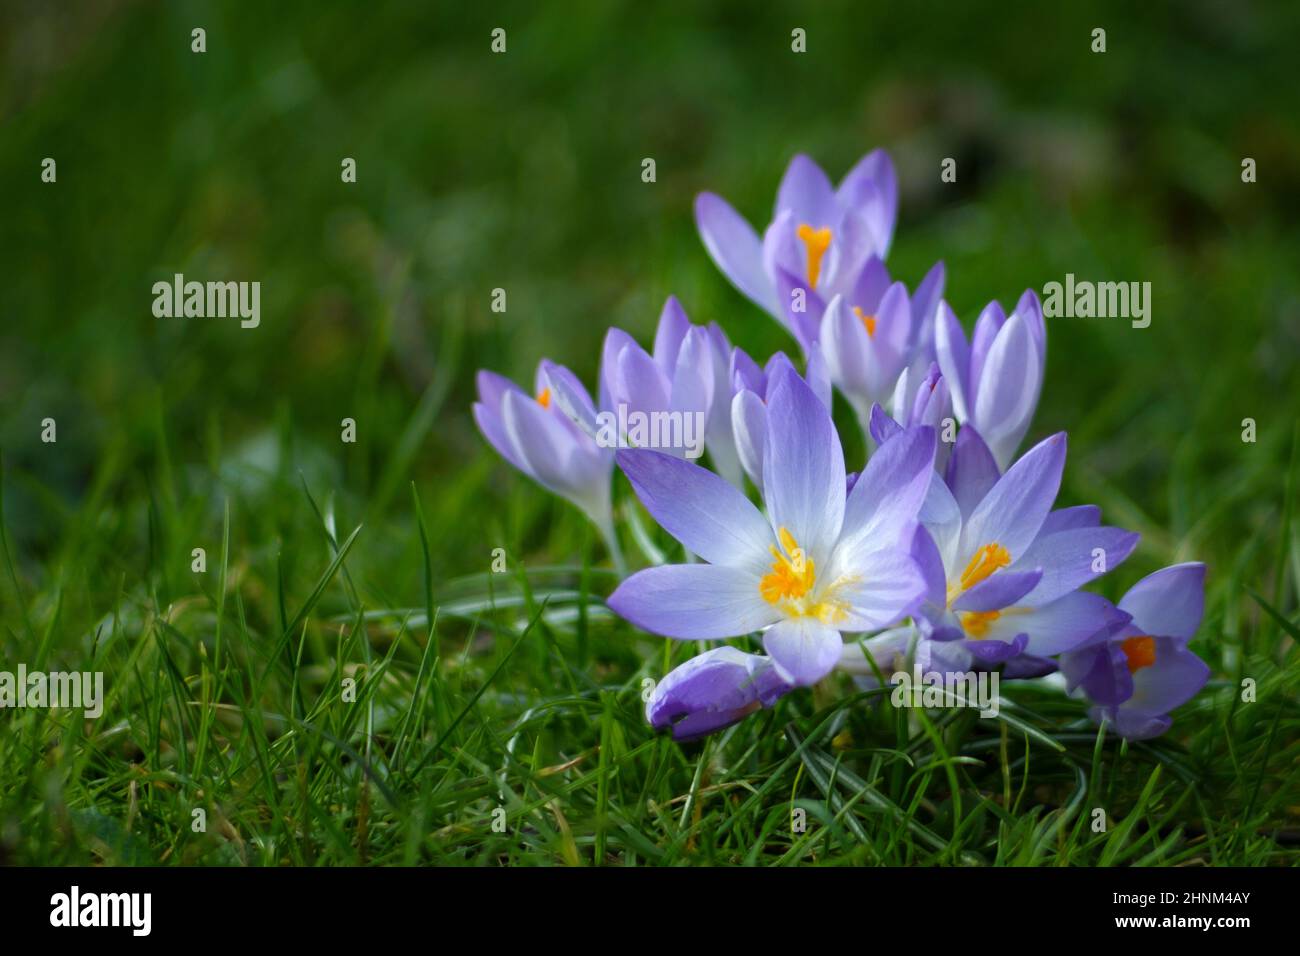 A UK spring flowering crocus, crocus sativus, in full flower in early morning sunshine. The plant is growing amongst grass on a garden lawn Stock Photo